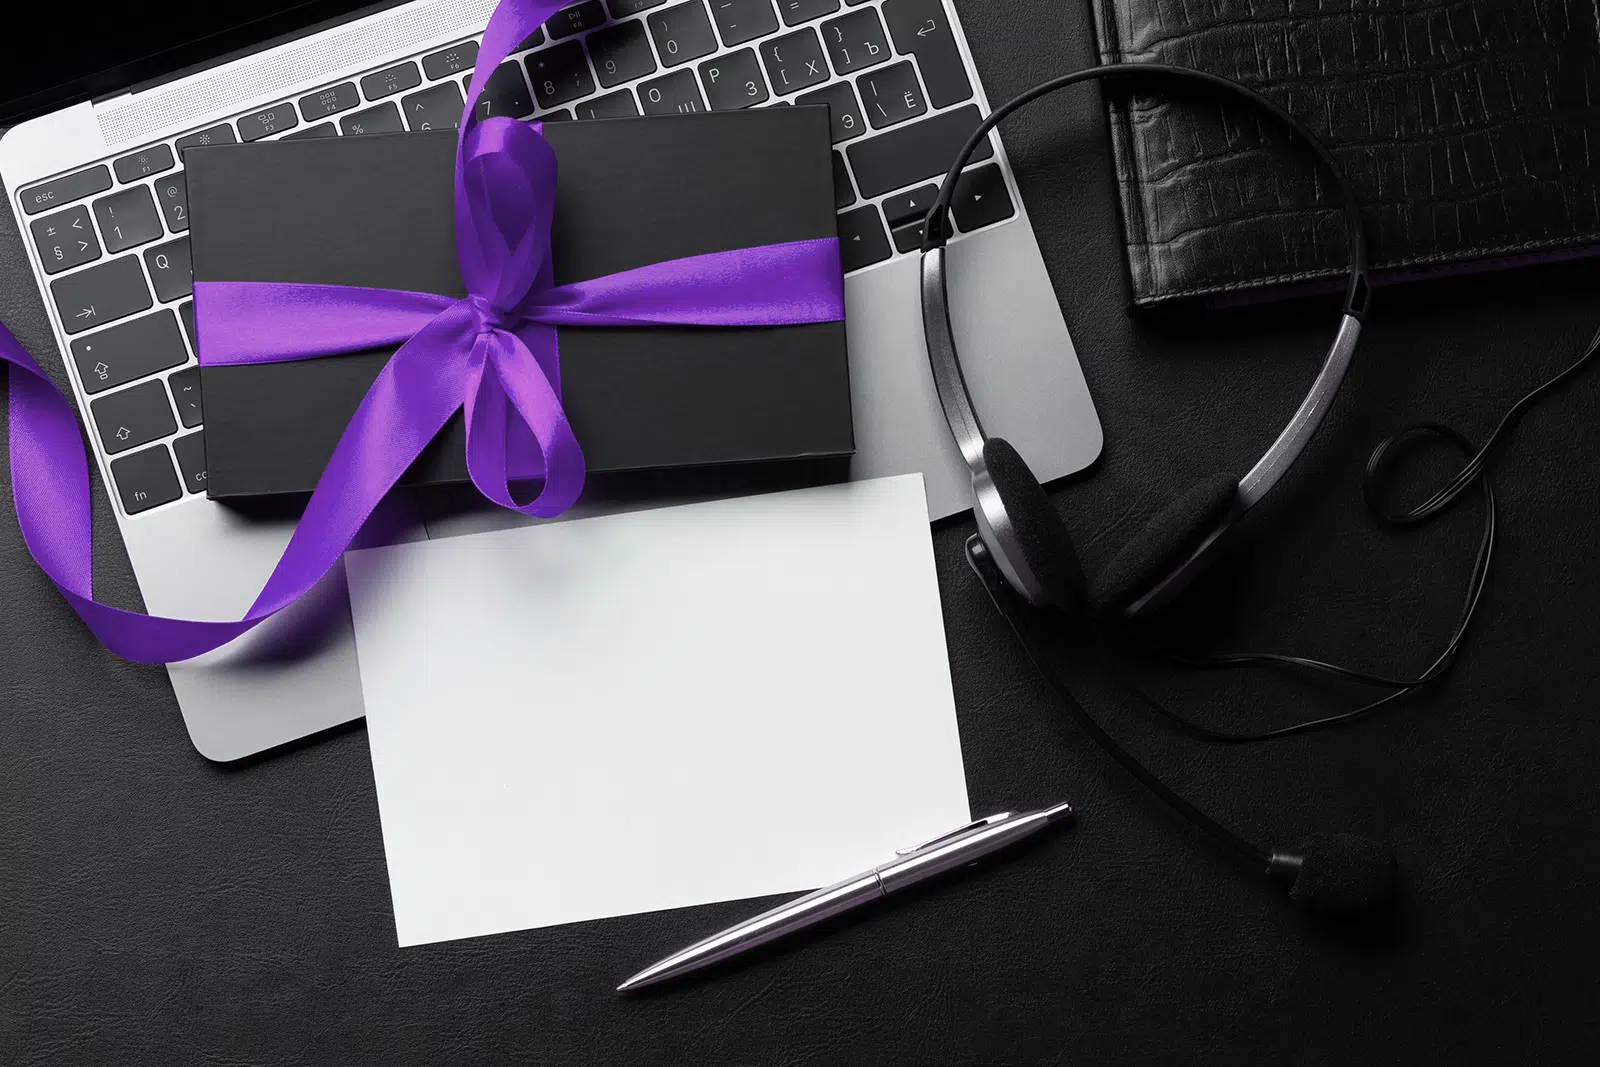 Computer, headphones, paper, pen and a gift box wrapped with purple ribbon on a desk